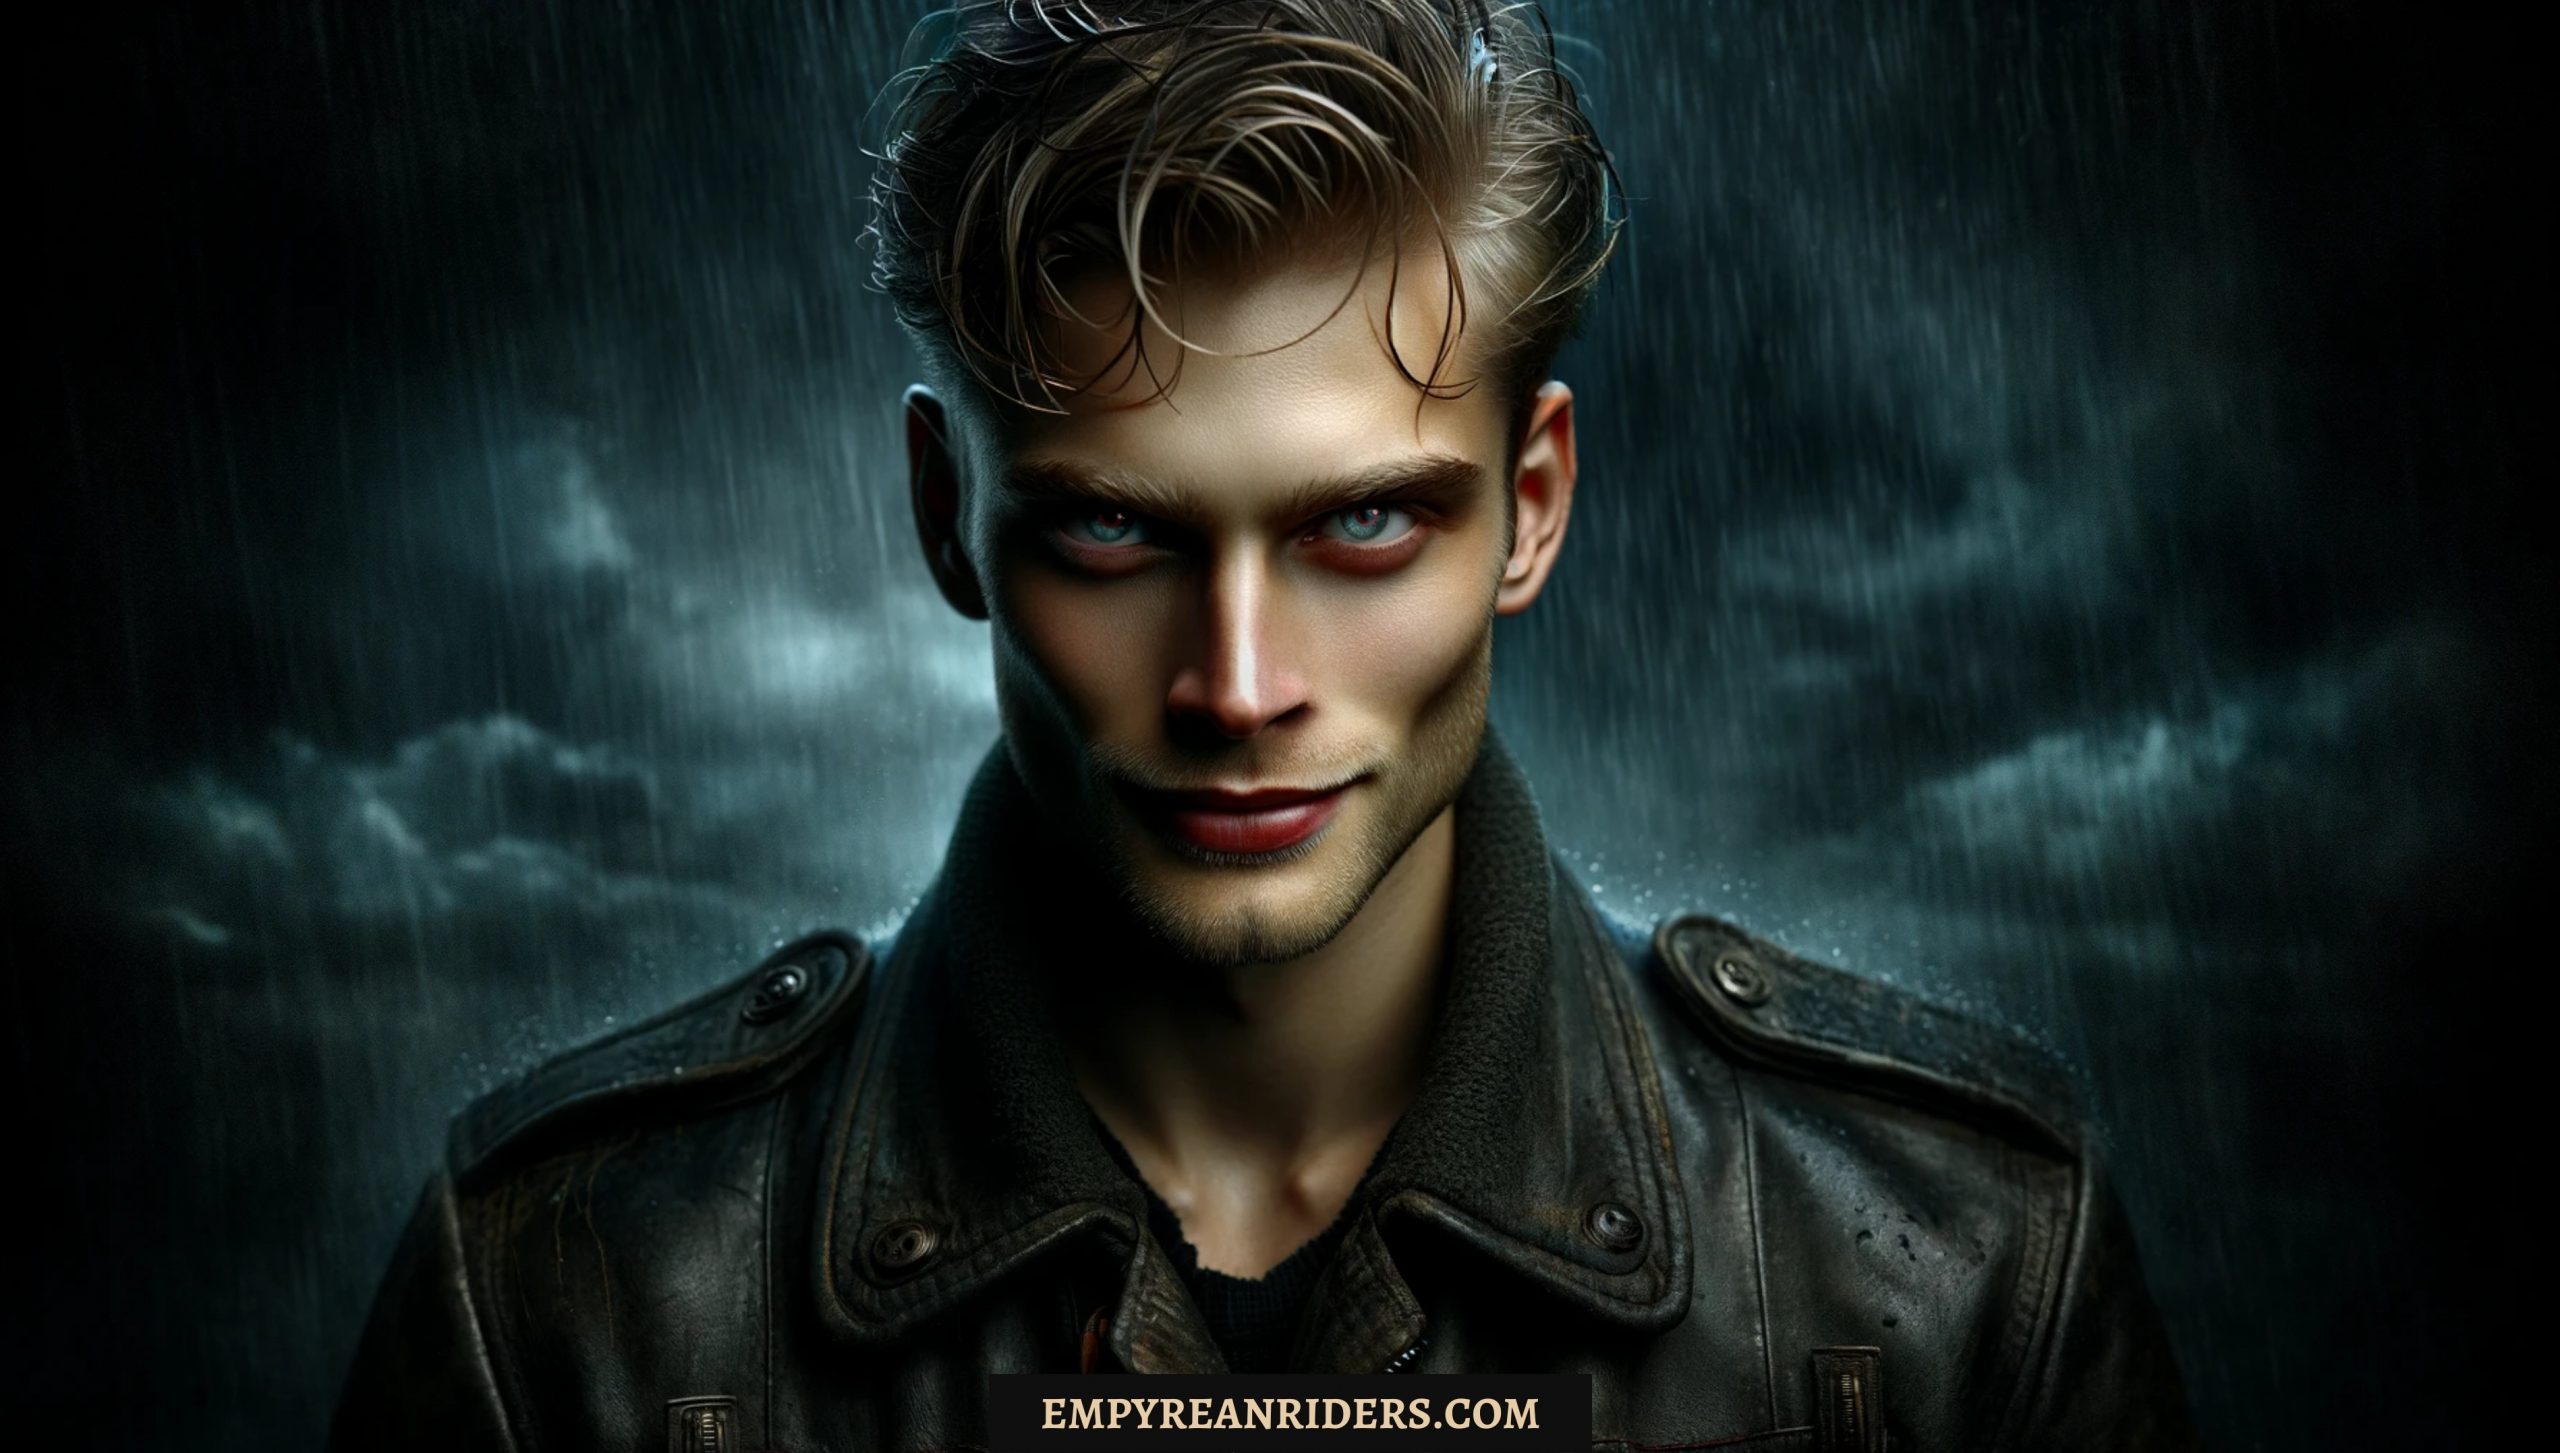 Evil Jack Barlowe with slight red tint in his eyes, Empyrean Series